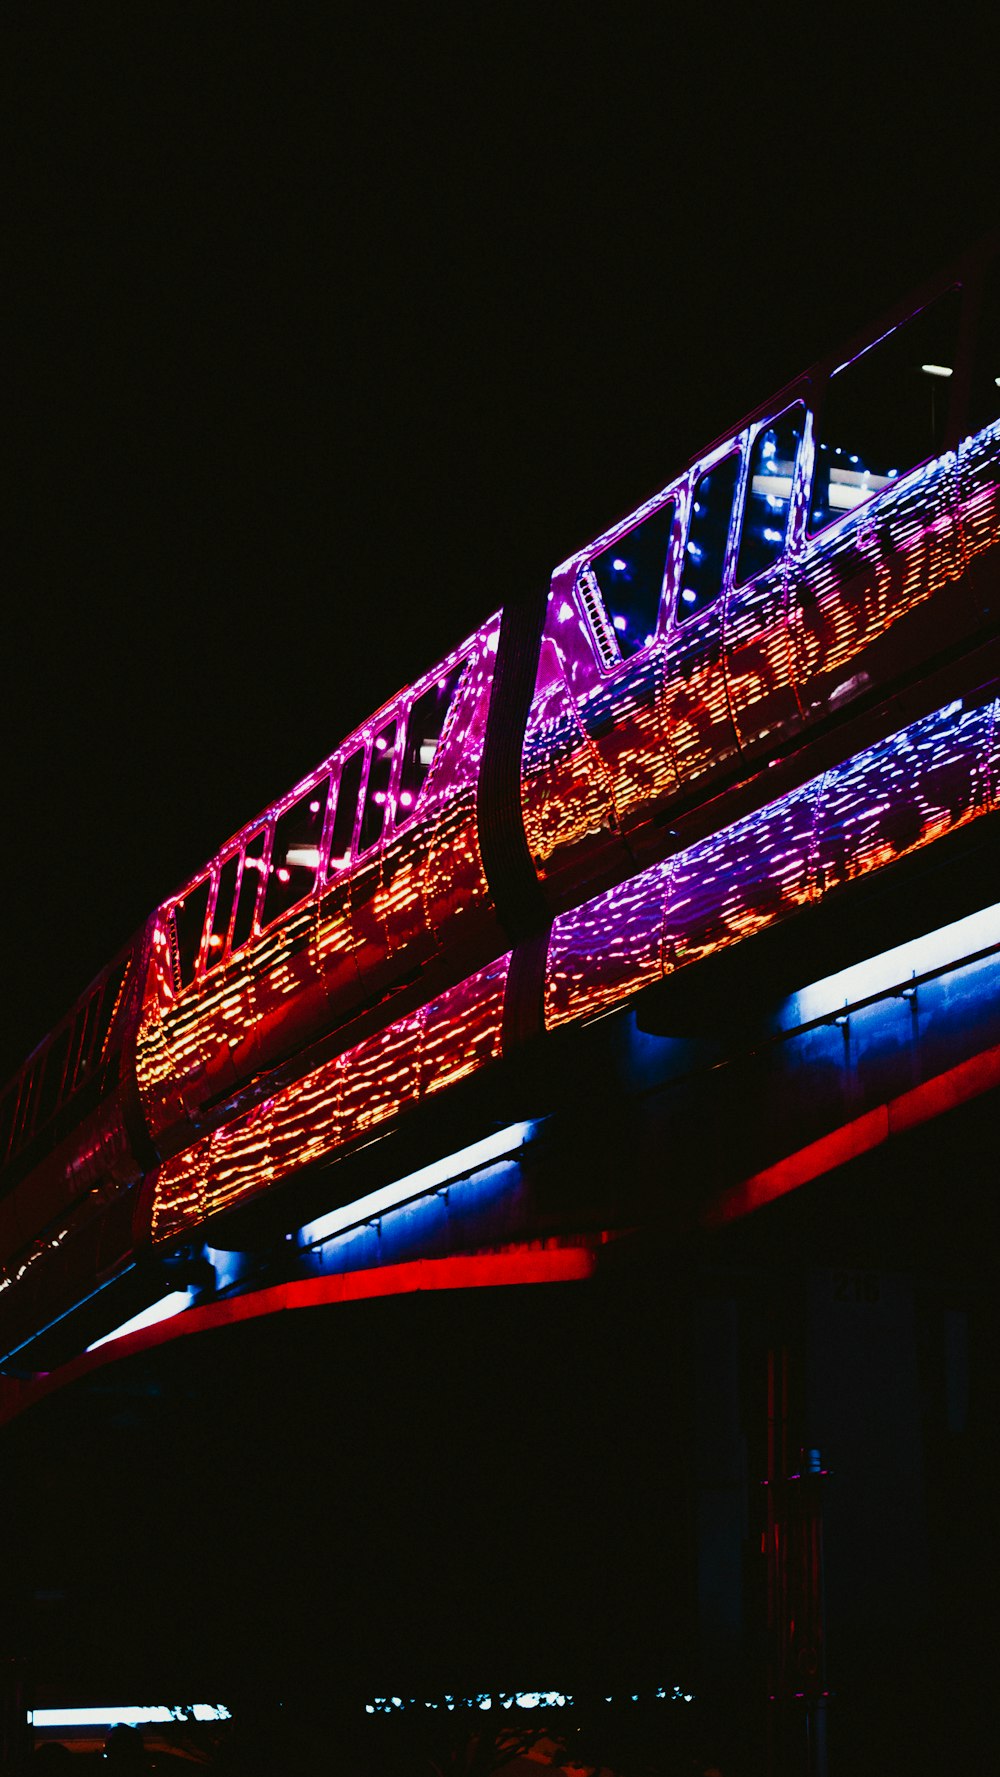 a lit up train traveling over a bridge at night